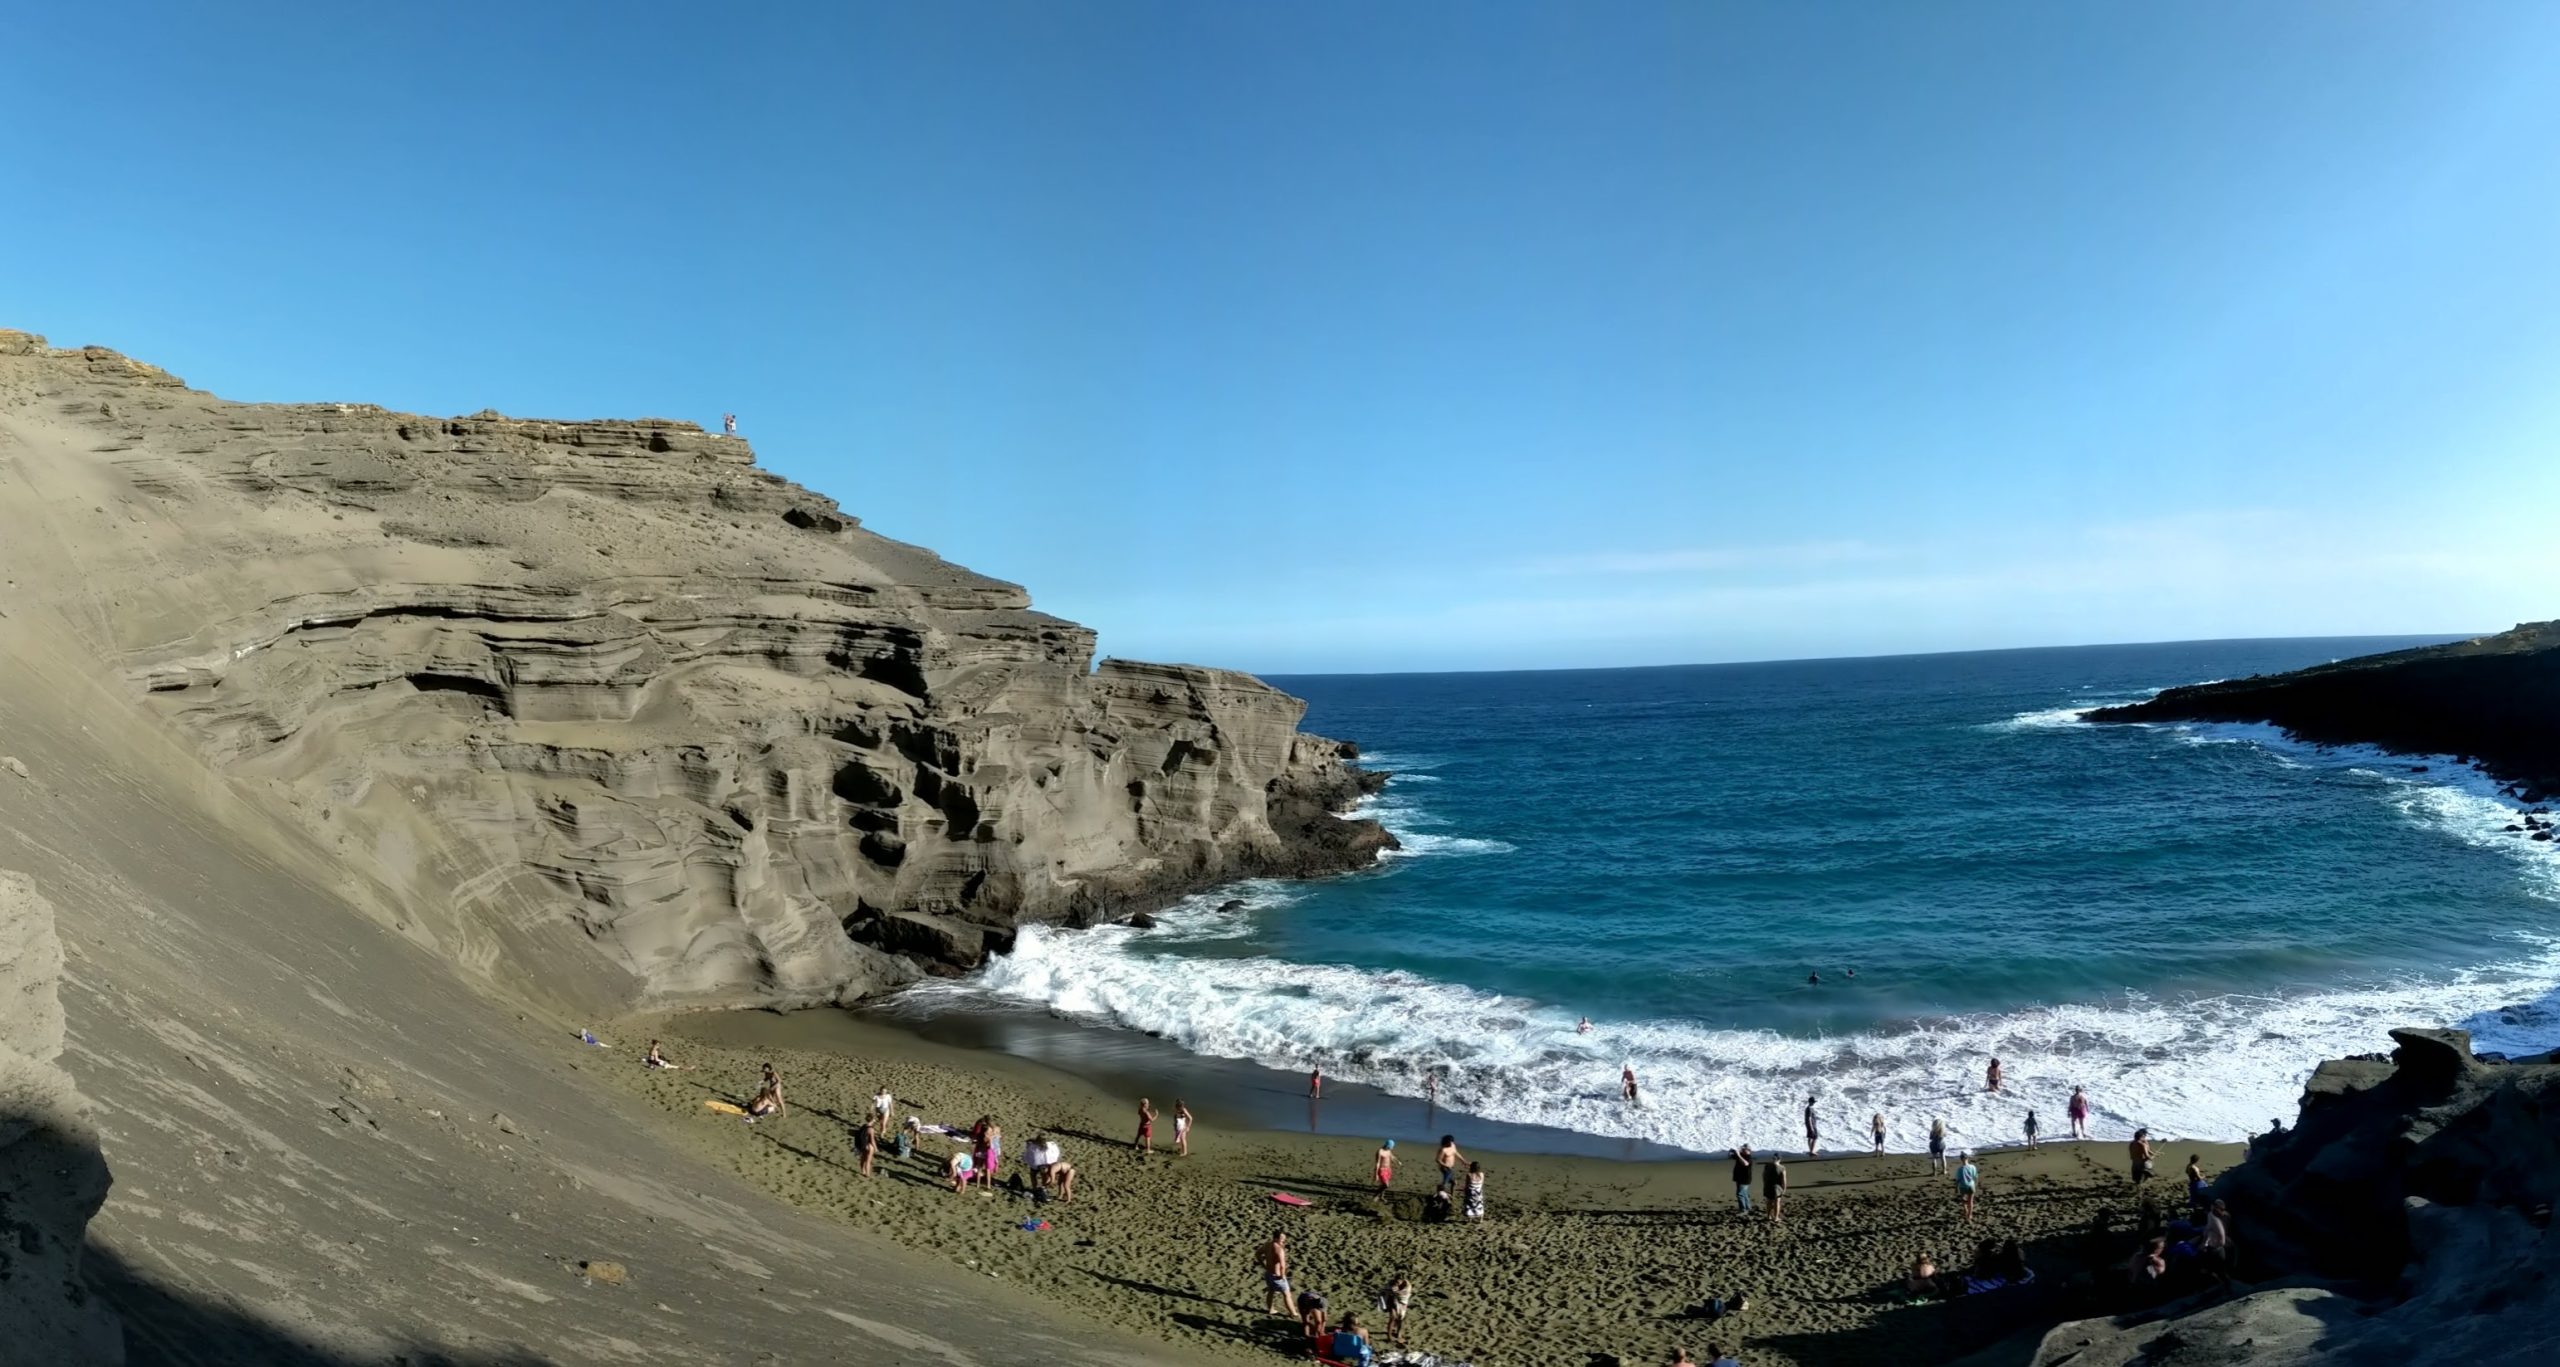 Hawiian beach composed of green olivine sand from weathering of nearby basaltic rock.